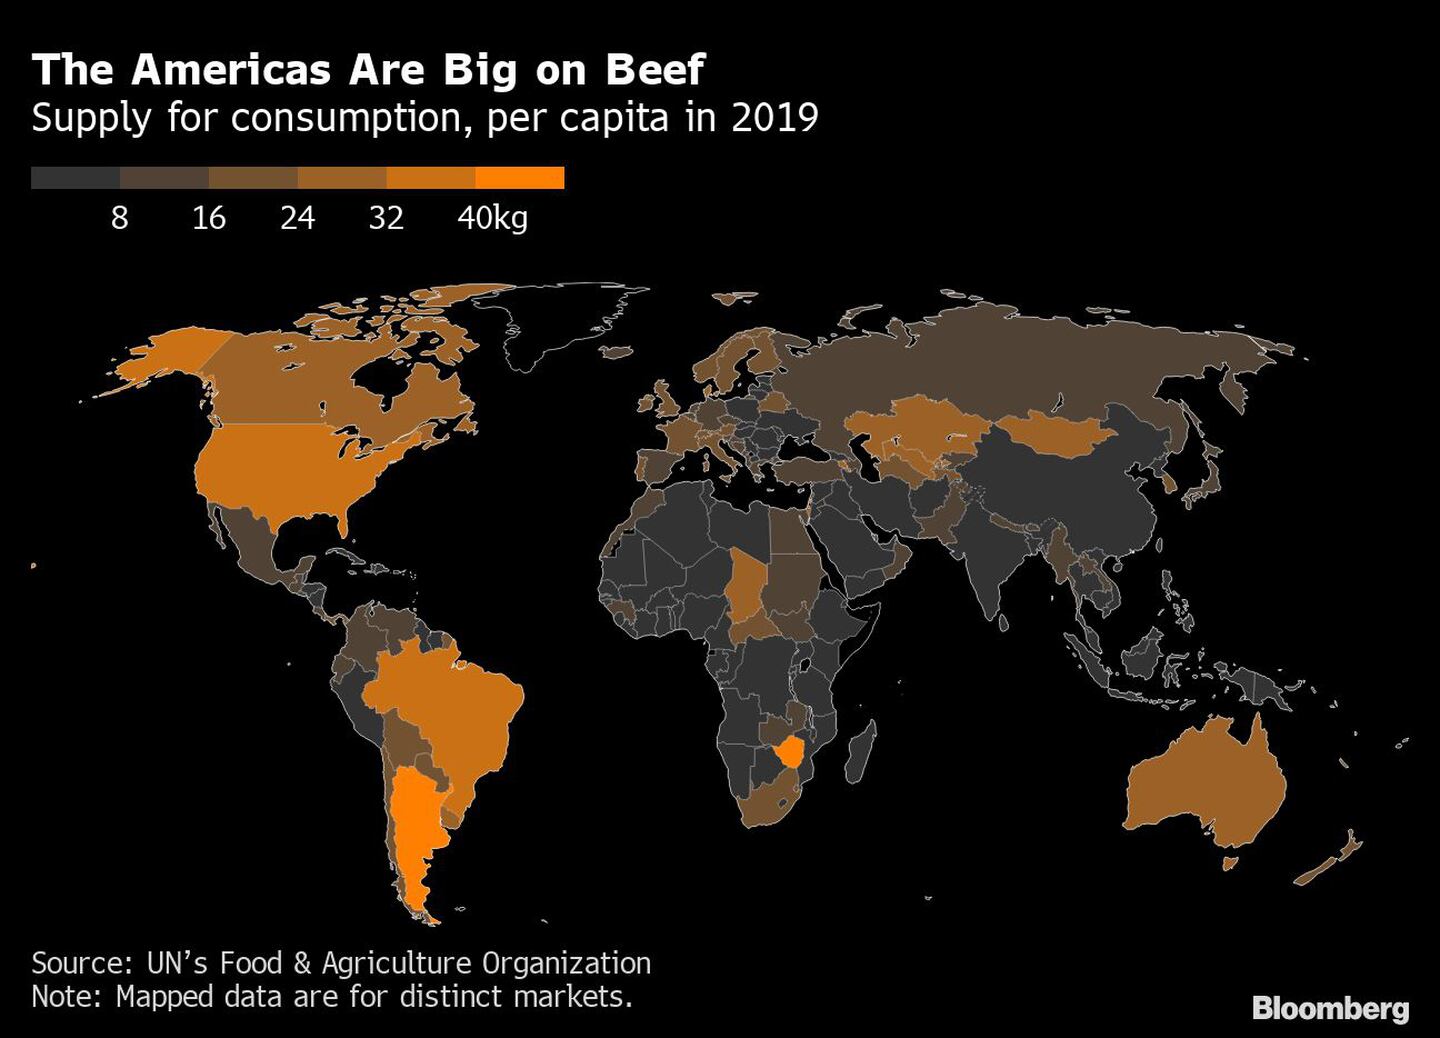 Brazil, Argentina and the US are some of the countries with the highest consumption of meat per person in the world